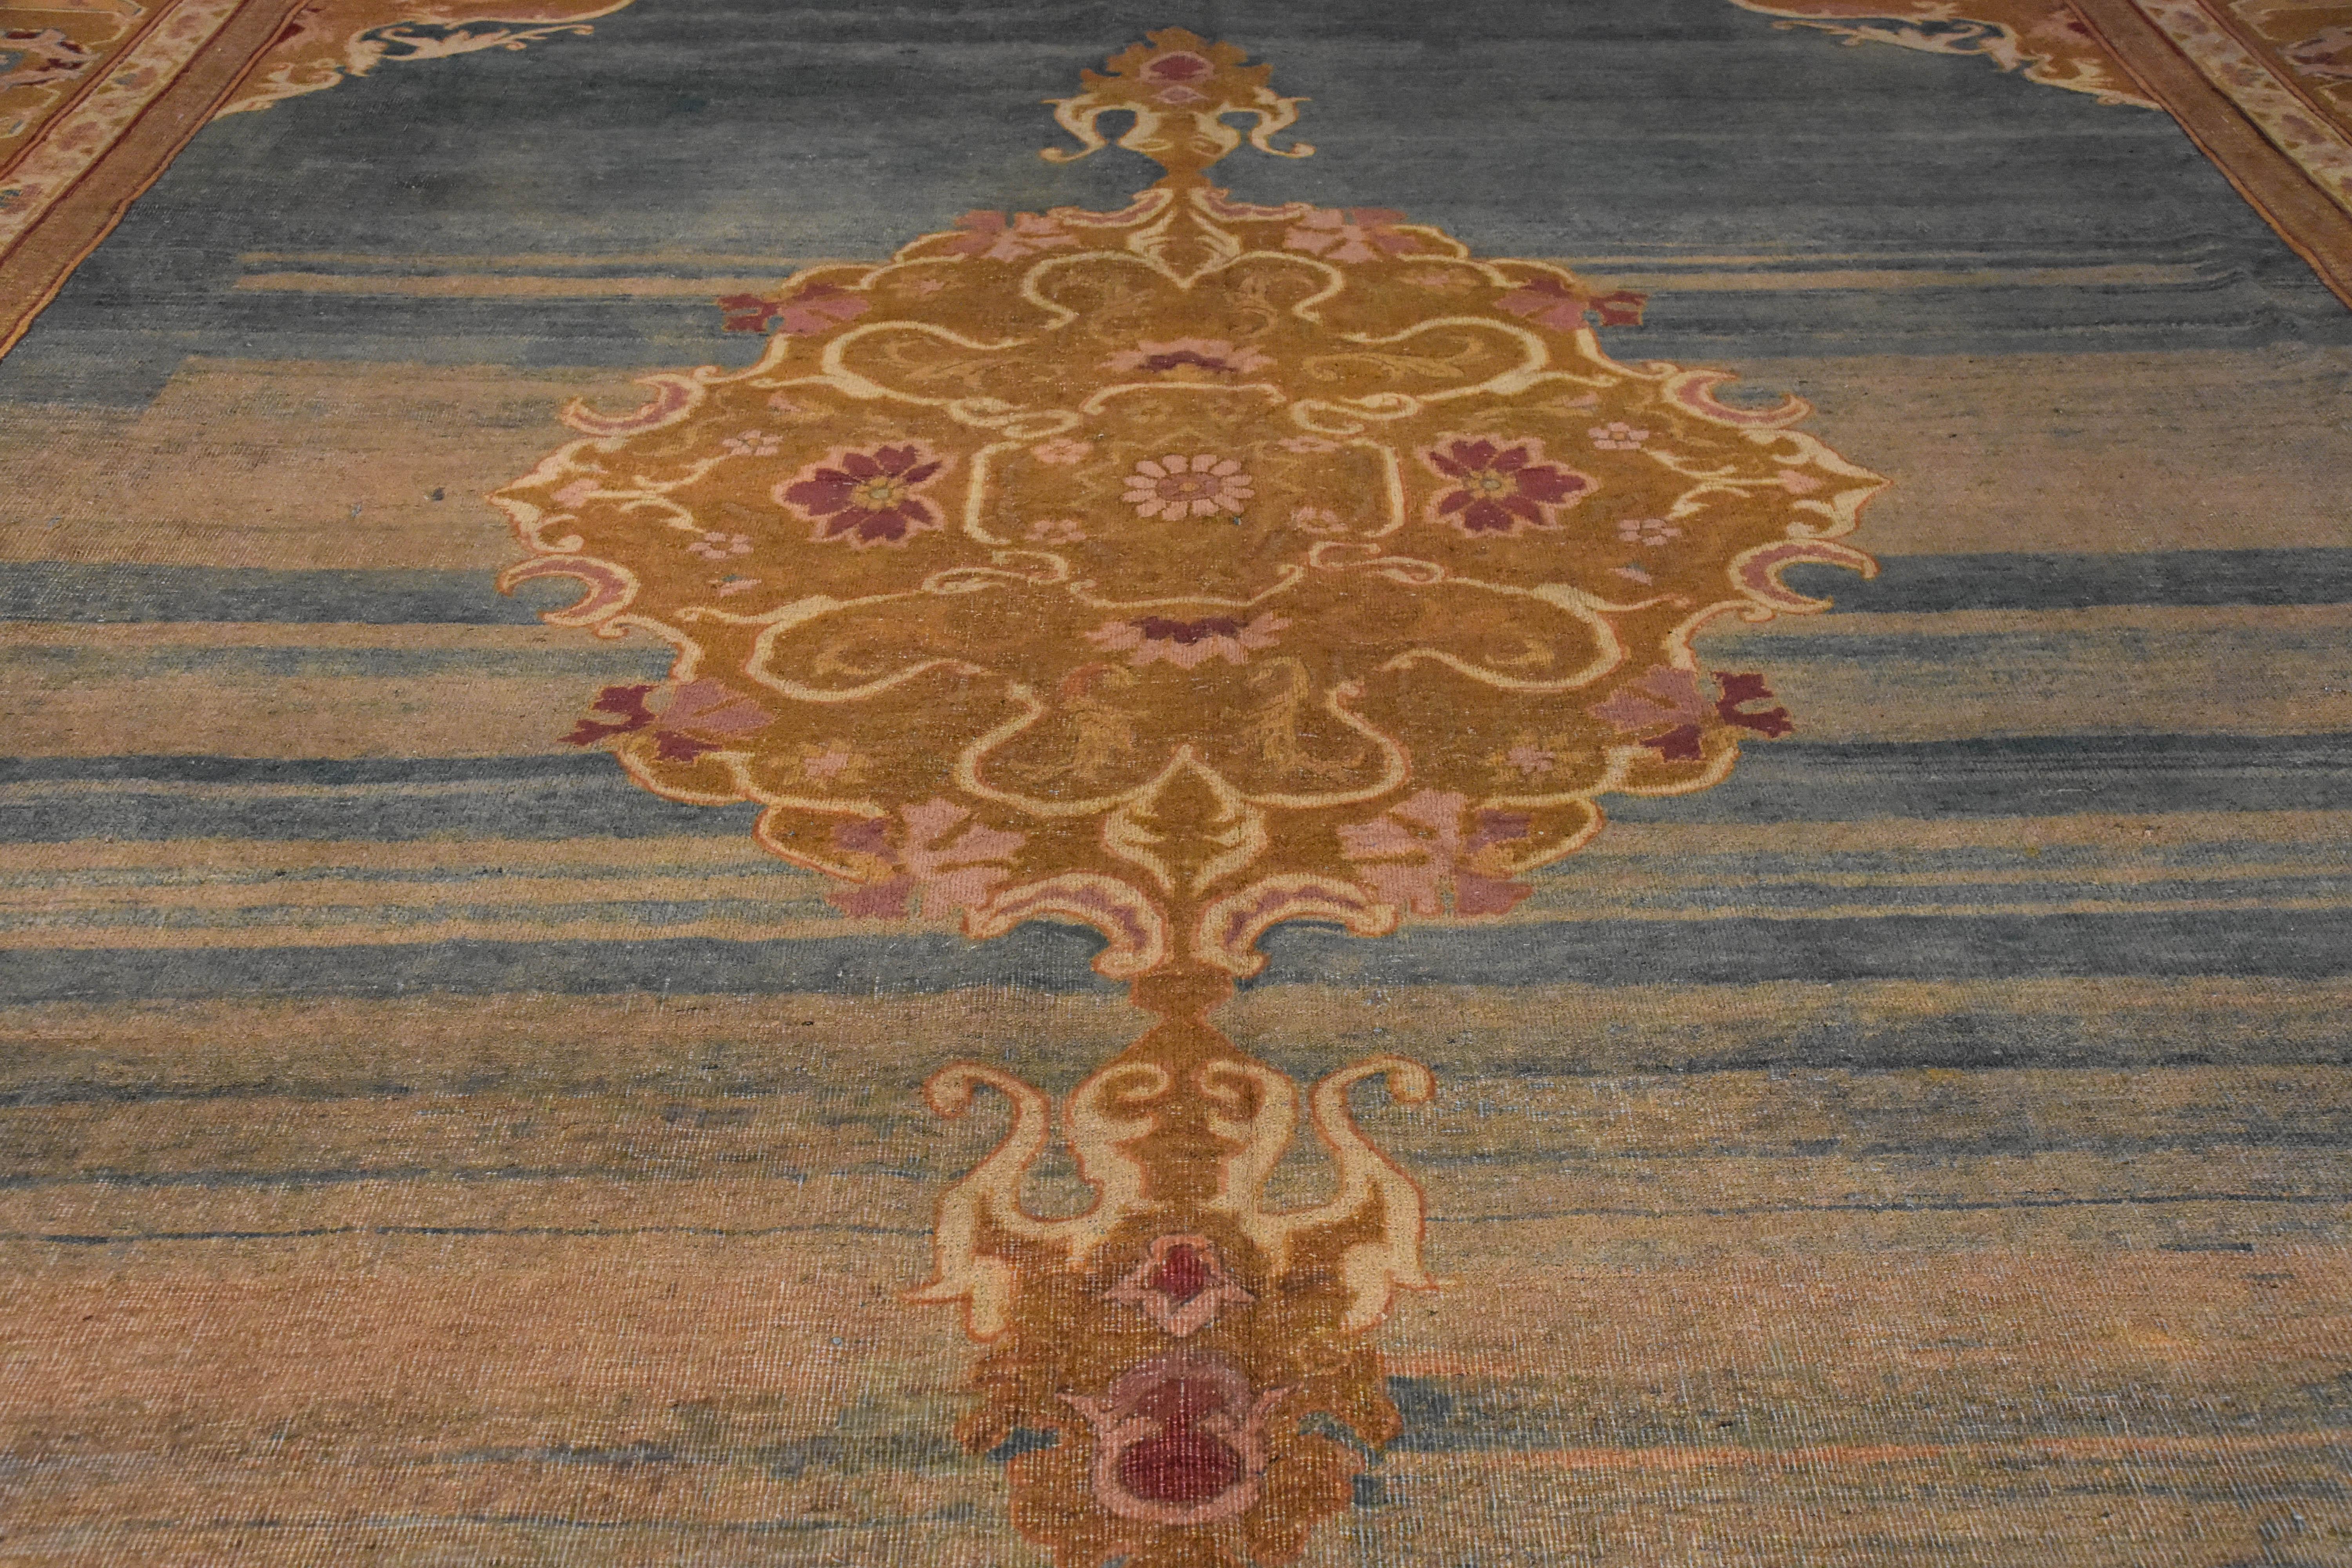 Hand-Knotted 20th Century Green, Gold, Pink White Abrash Amritsar Rug from India, circa 1870s